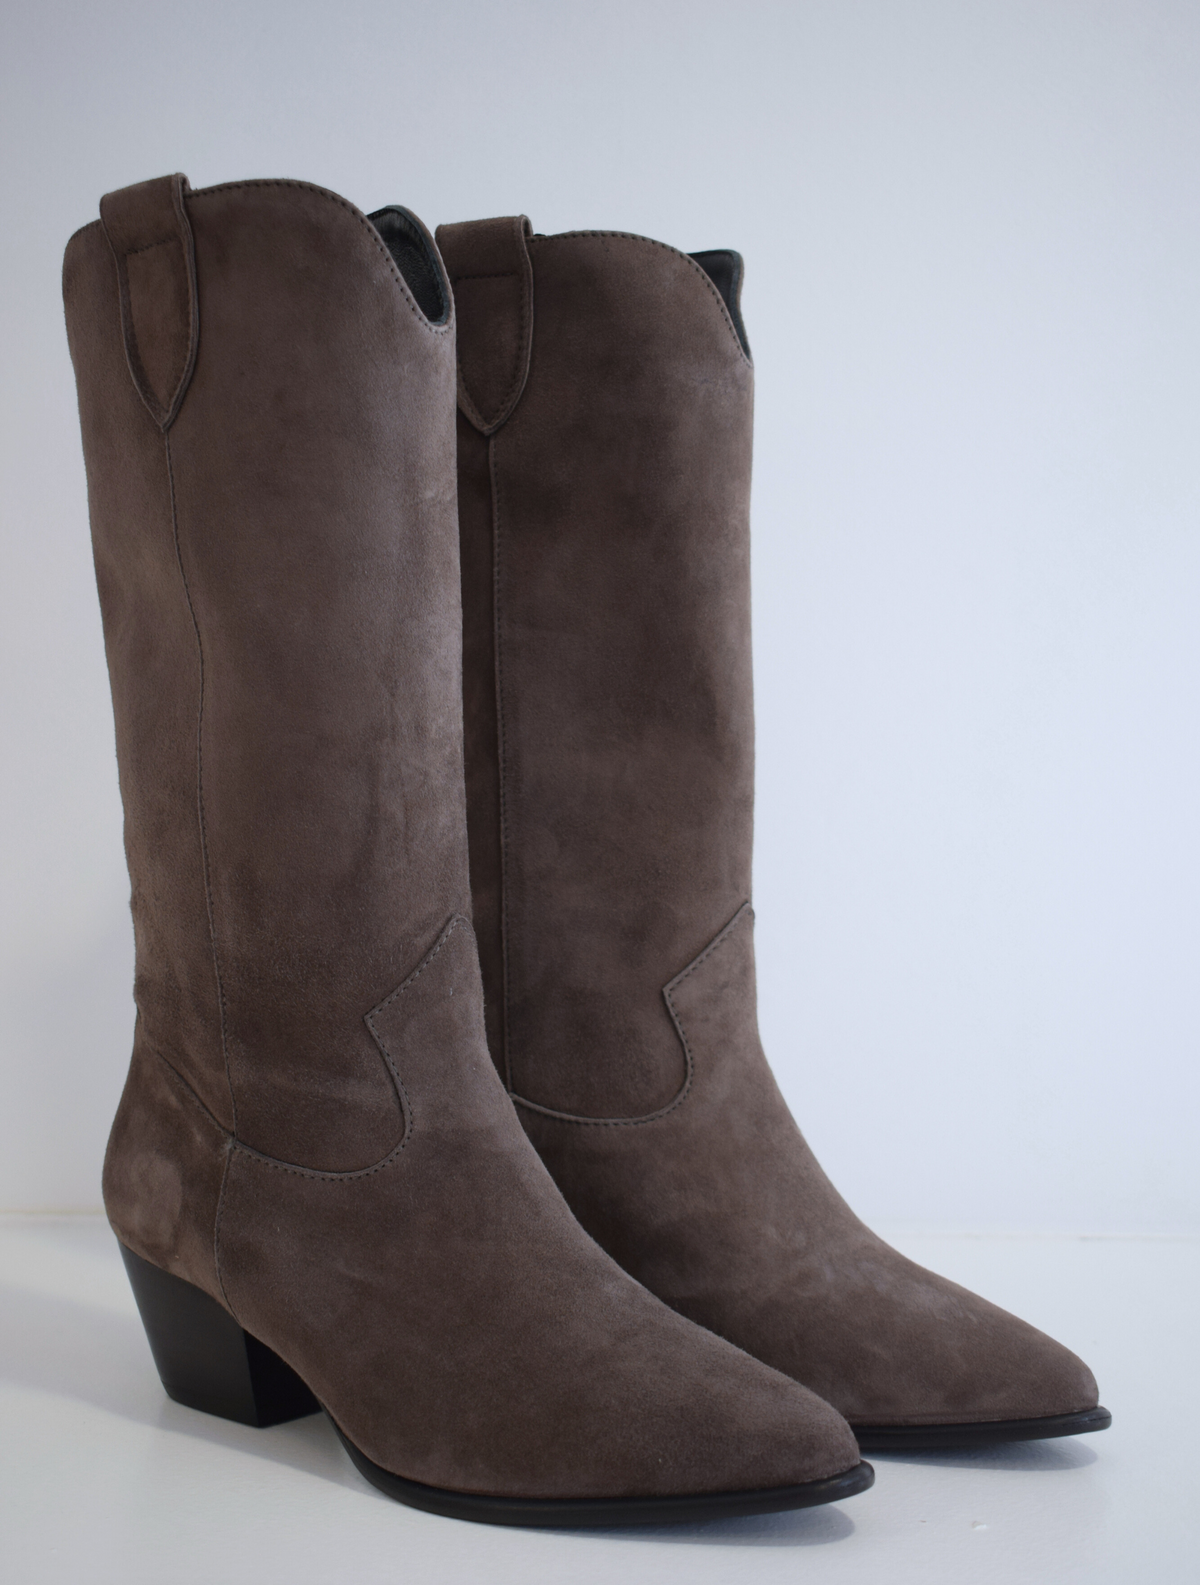 Dark taupe grey mid length cowboy inspired boot